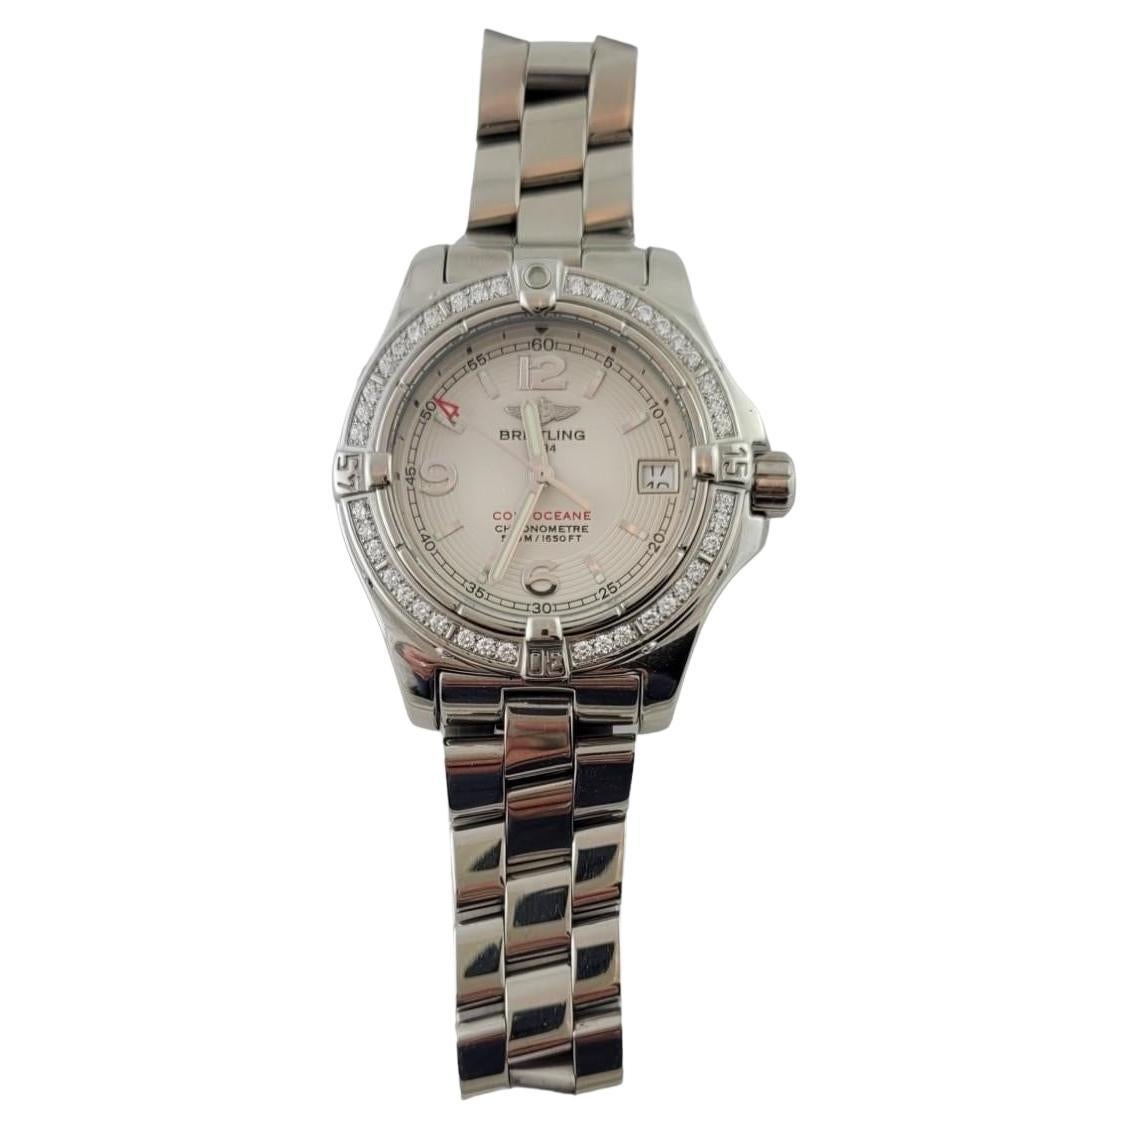 2007 Breitling Ladies Colt Oceane Diamond Watch A77380 Box/Papers # 17227 For Sale